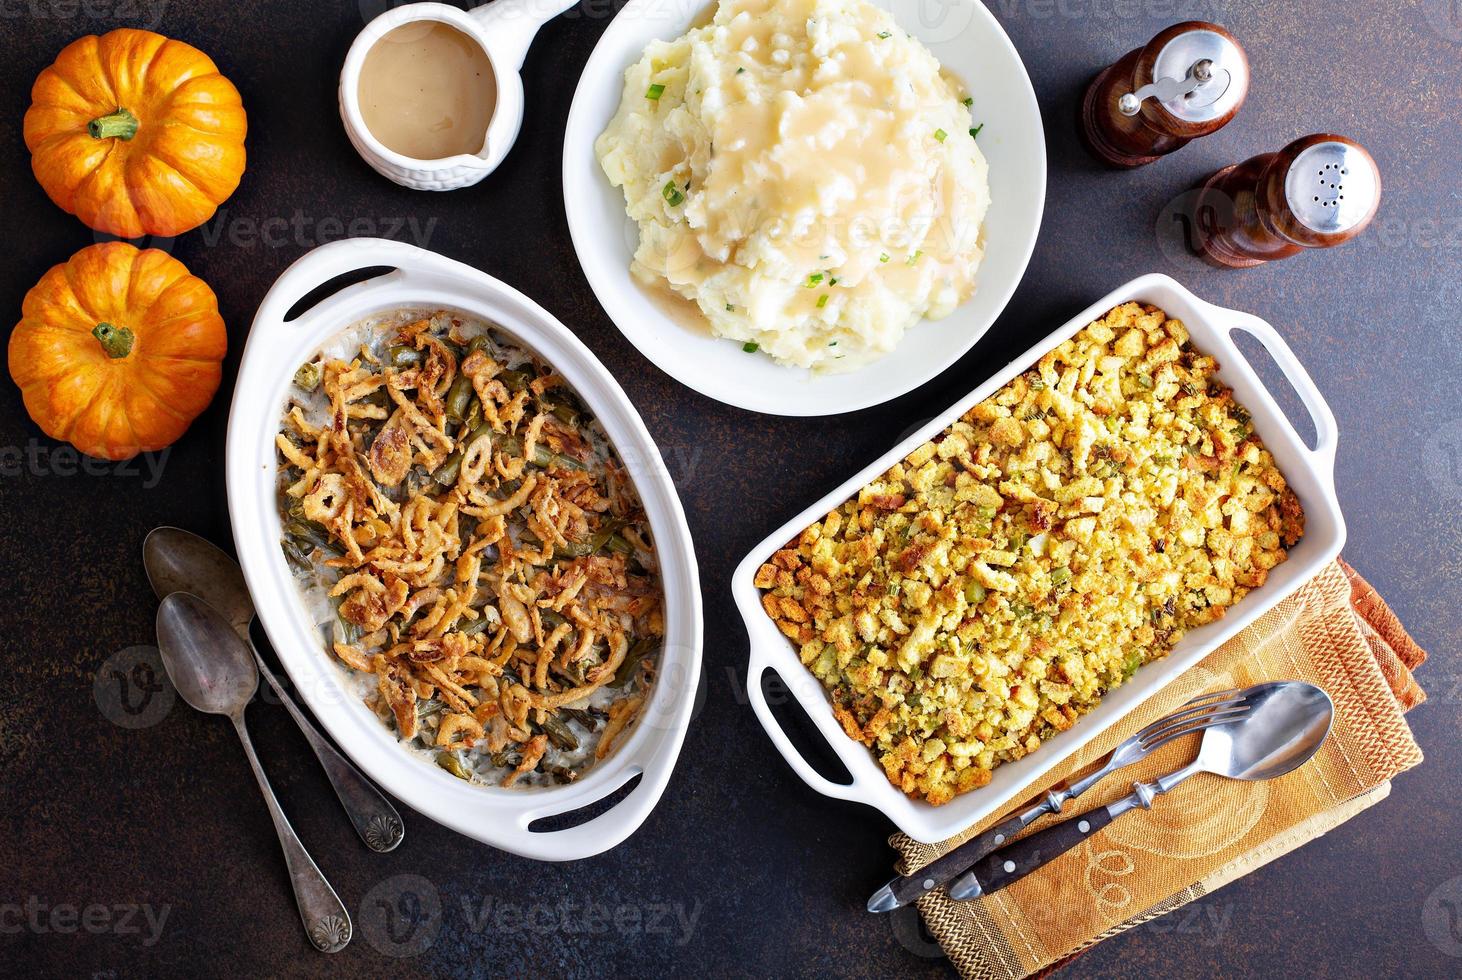 All traditional Thanksgiving side dishes photo